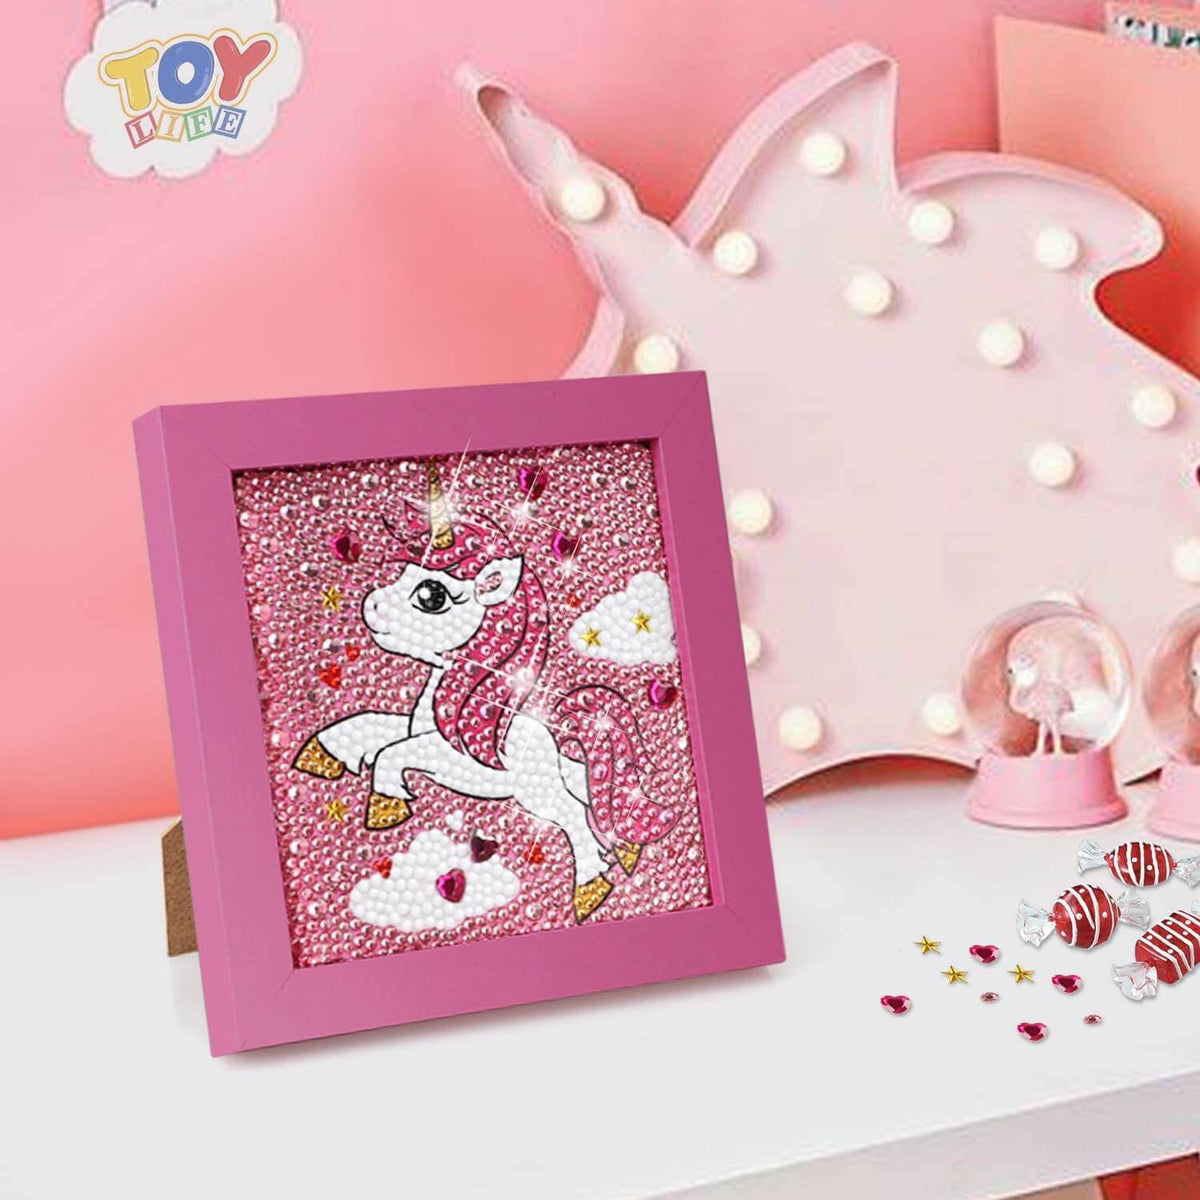  TOY Life 5D Diamond Gems Kits for Kids with Wooden Frame -  Diamond Arts and Crafts for Kids Ages 6-8-10-12 Gem Art Painting Kit -  Unicorn Diamond Dots Painting Kits for